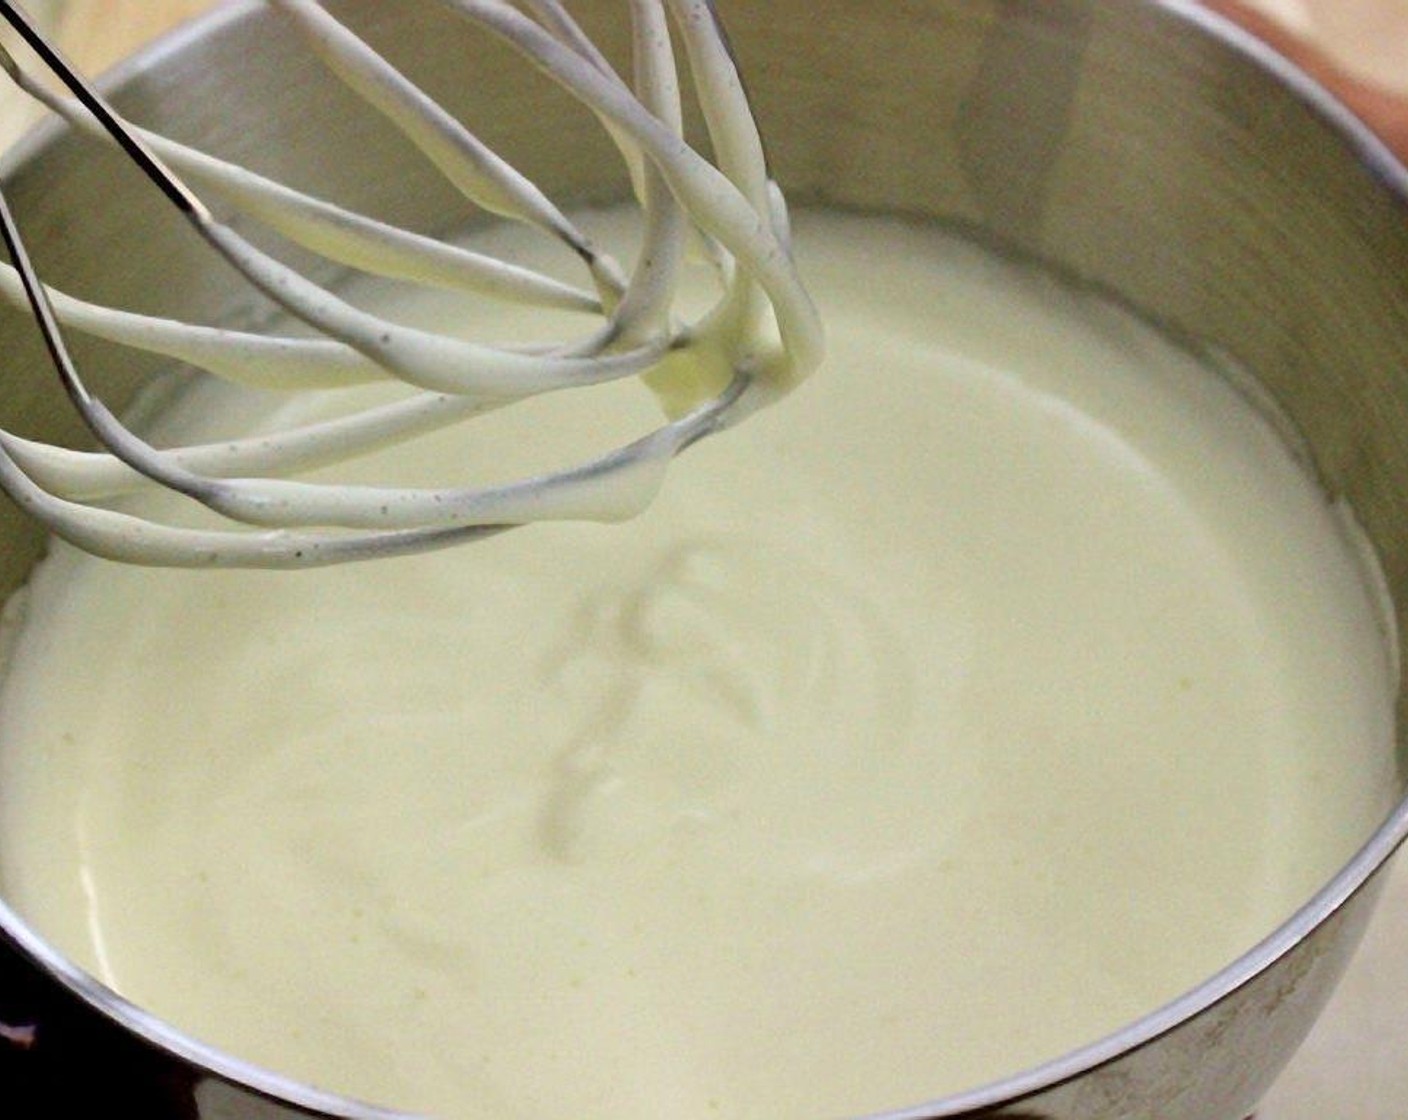 step 3 Vigorously whisk Eggs (6) and Granulated Sugar (1 cup) together until they are pale yellow and foamy.